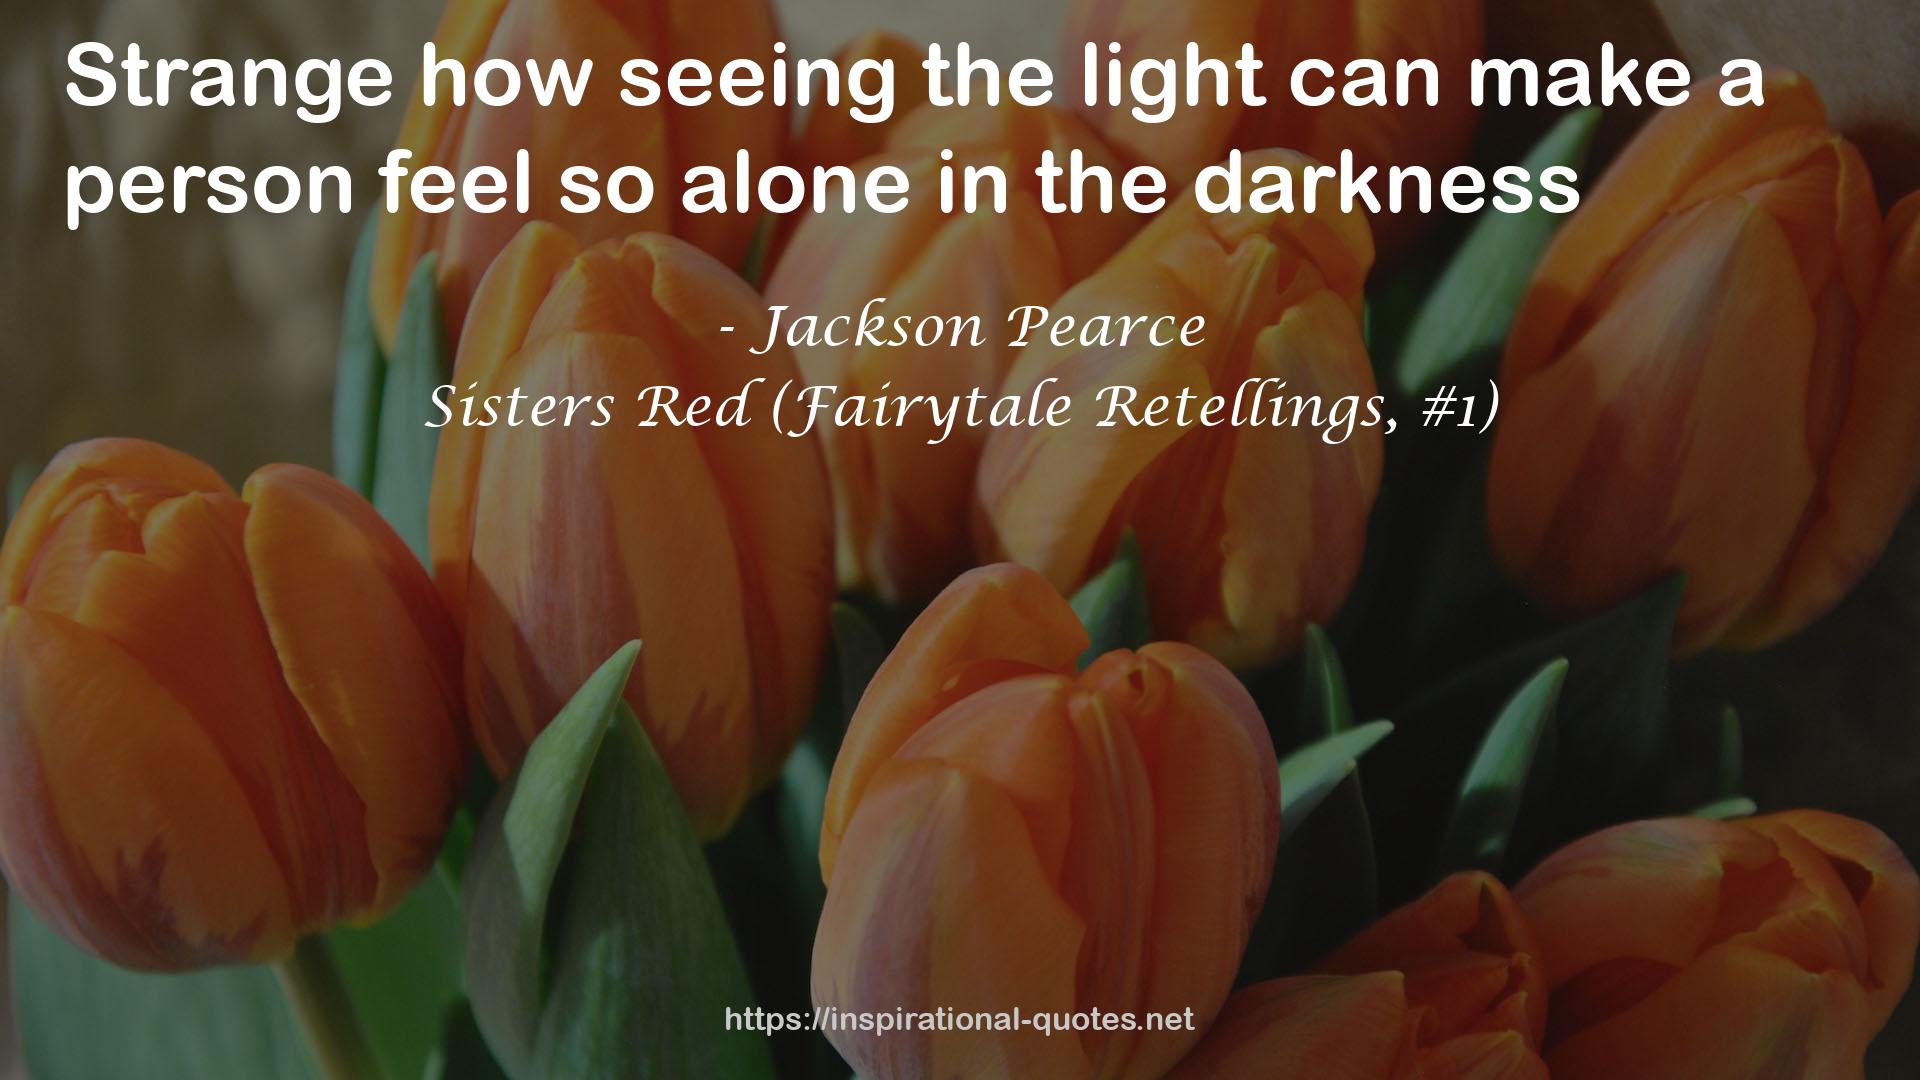 Sisters Red (Fairytale Retellings, #1) QUOTES